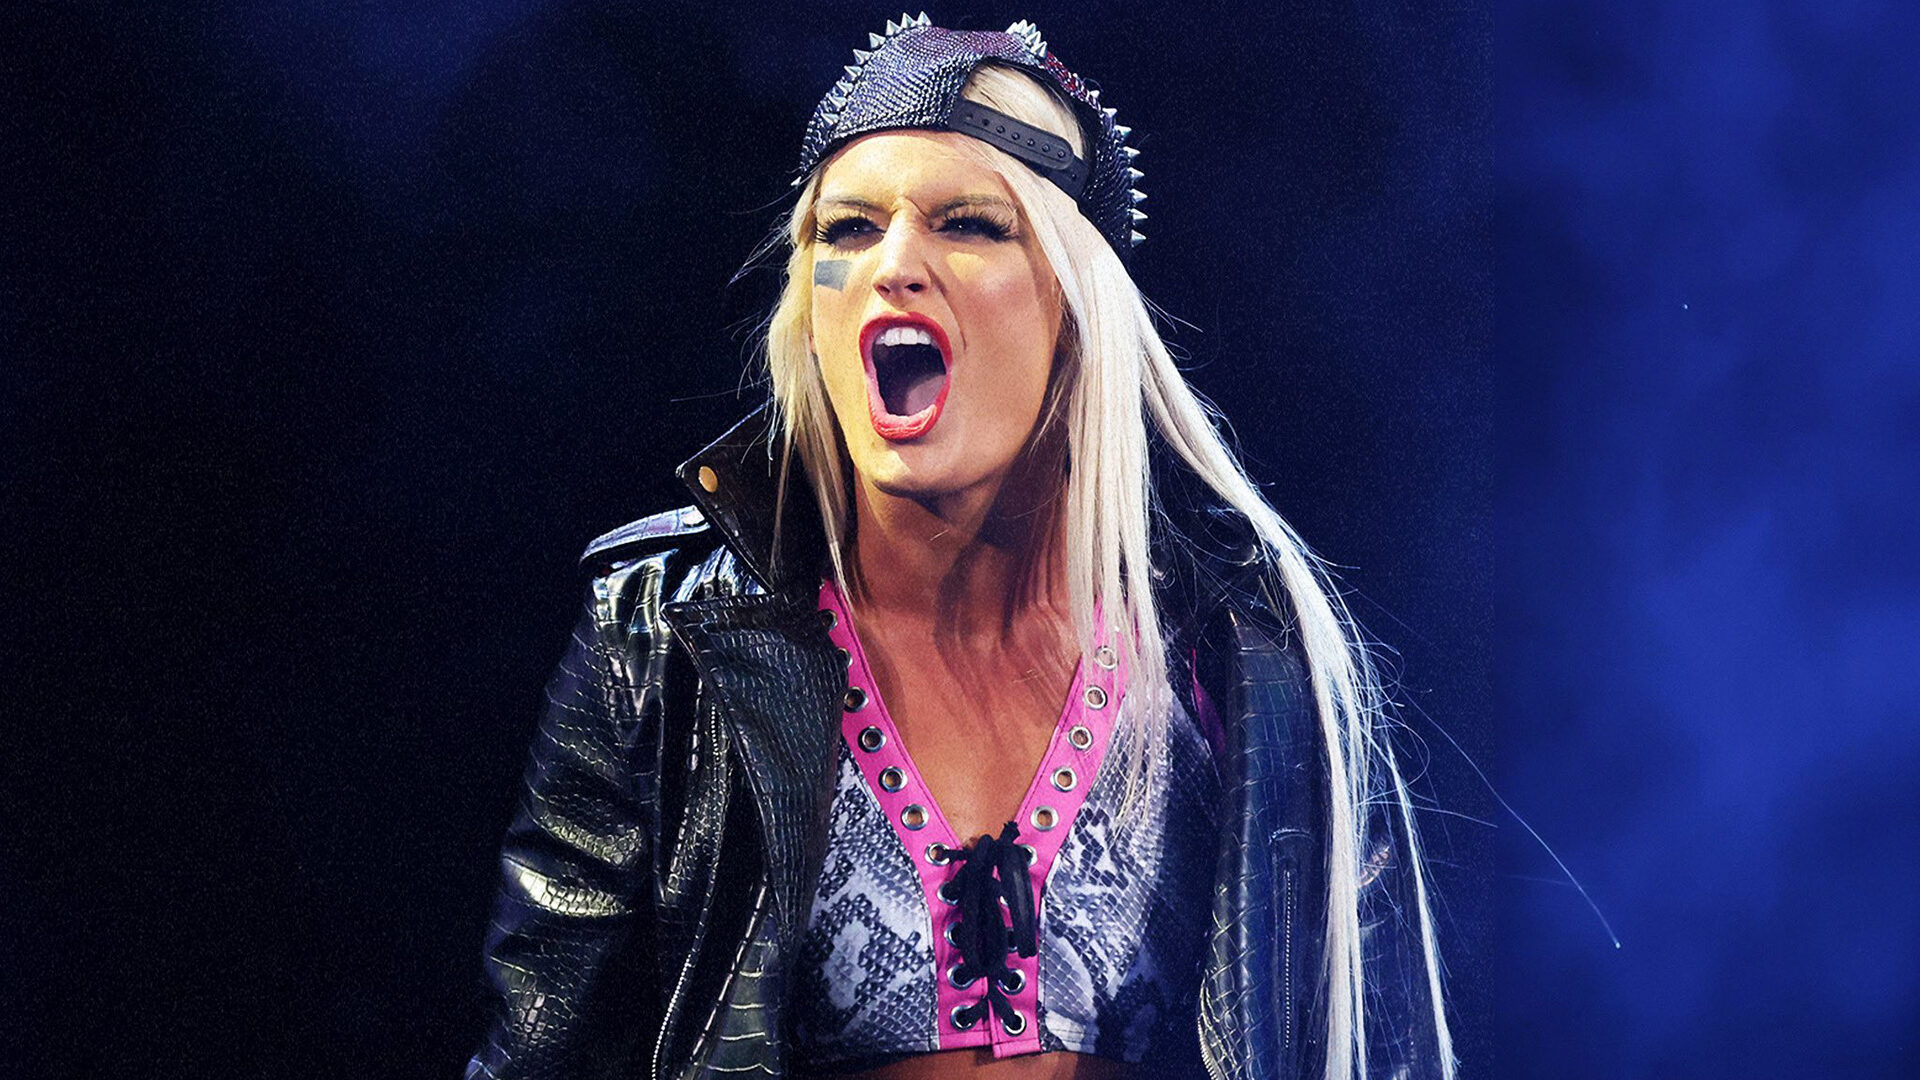 Real Reason Why Toni Storm Released From WWE